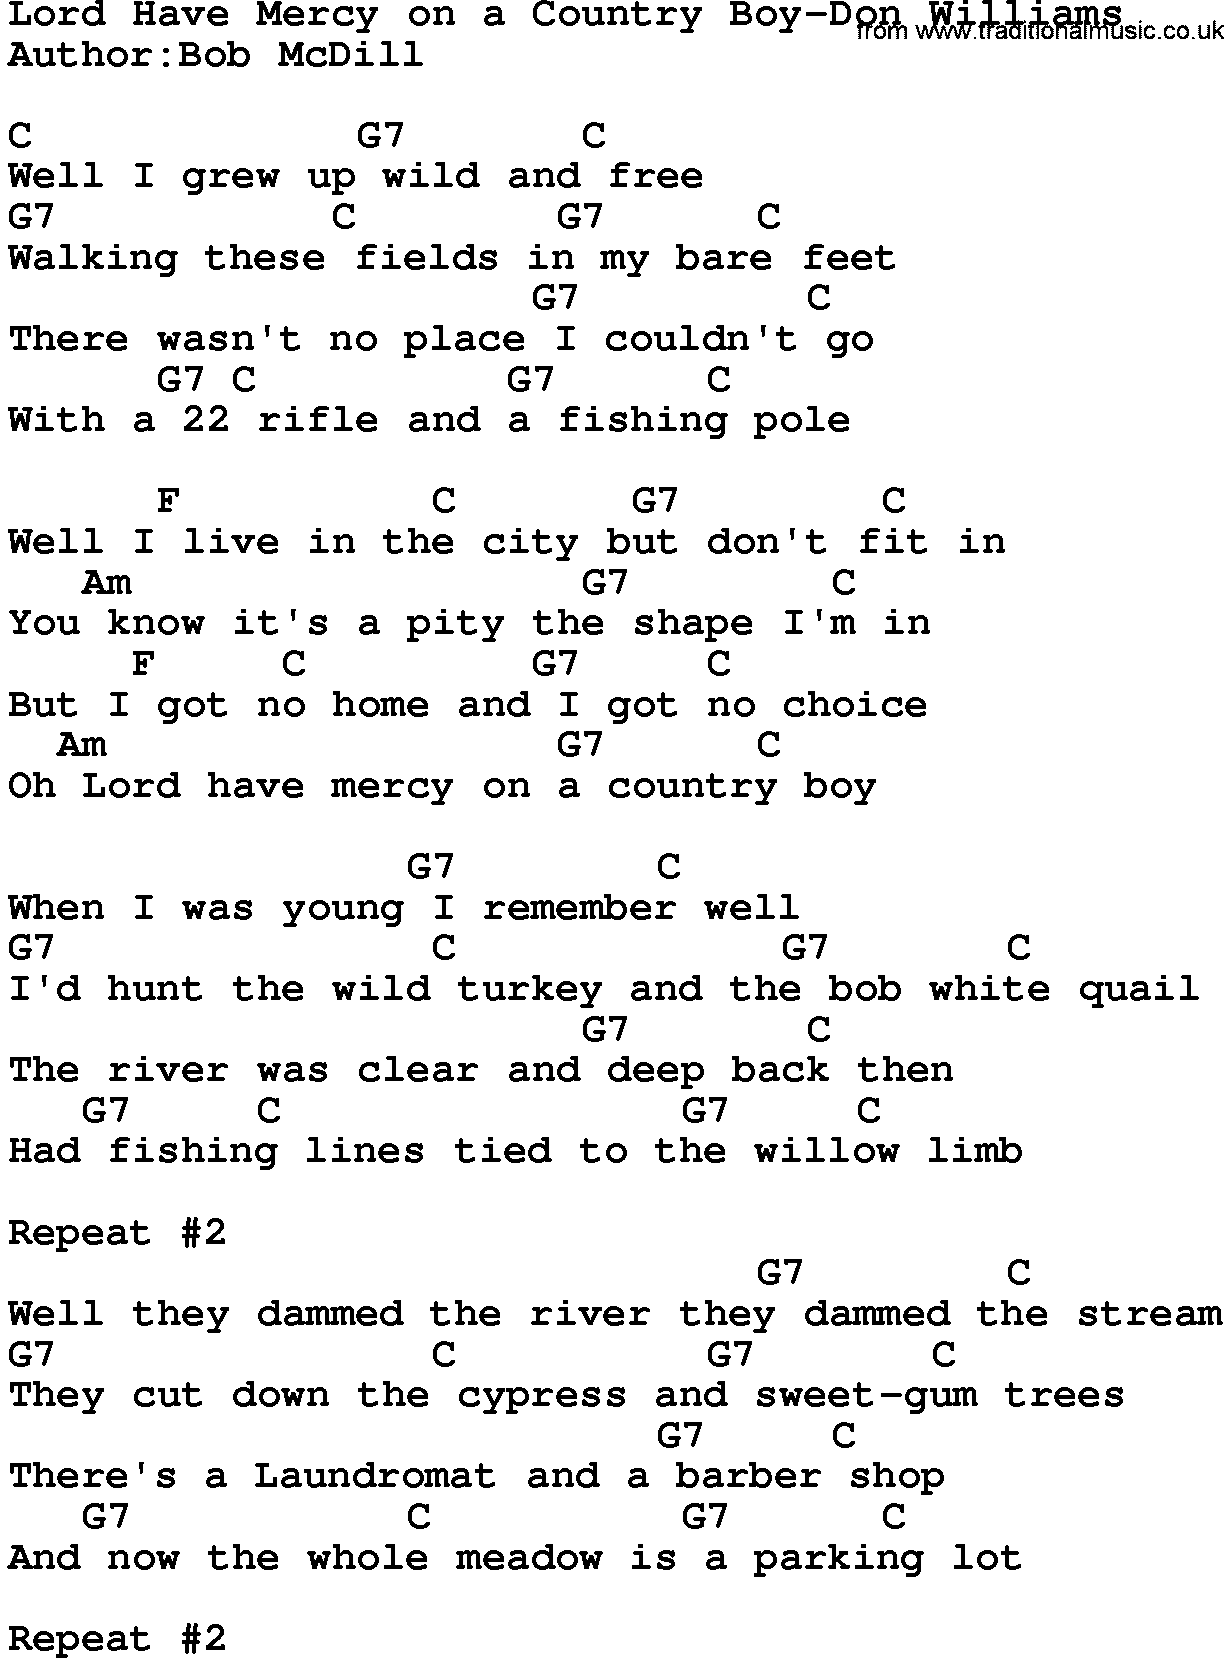 Country music song: Lord Have Mercy On A Country Boy-Don Williams lyrics and chords